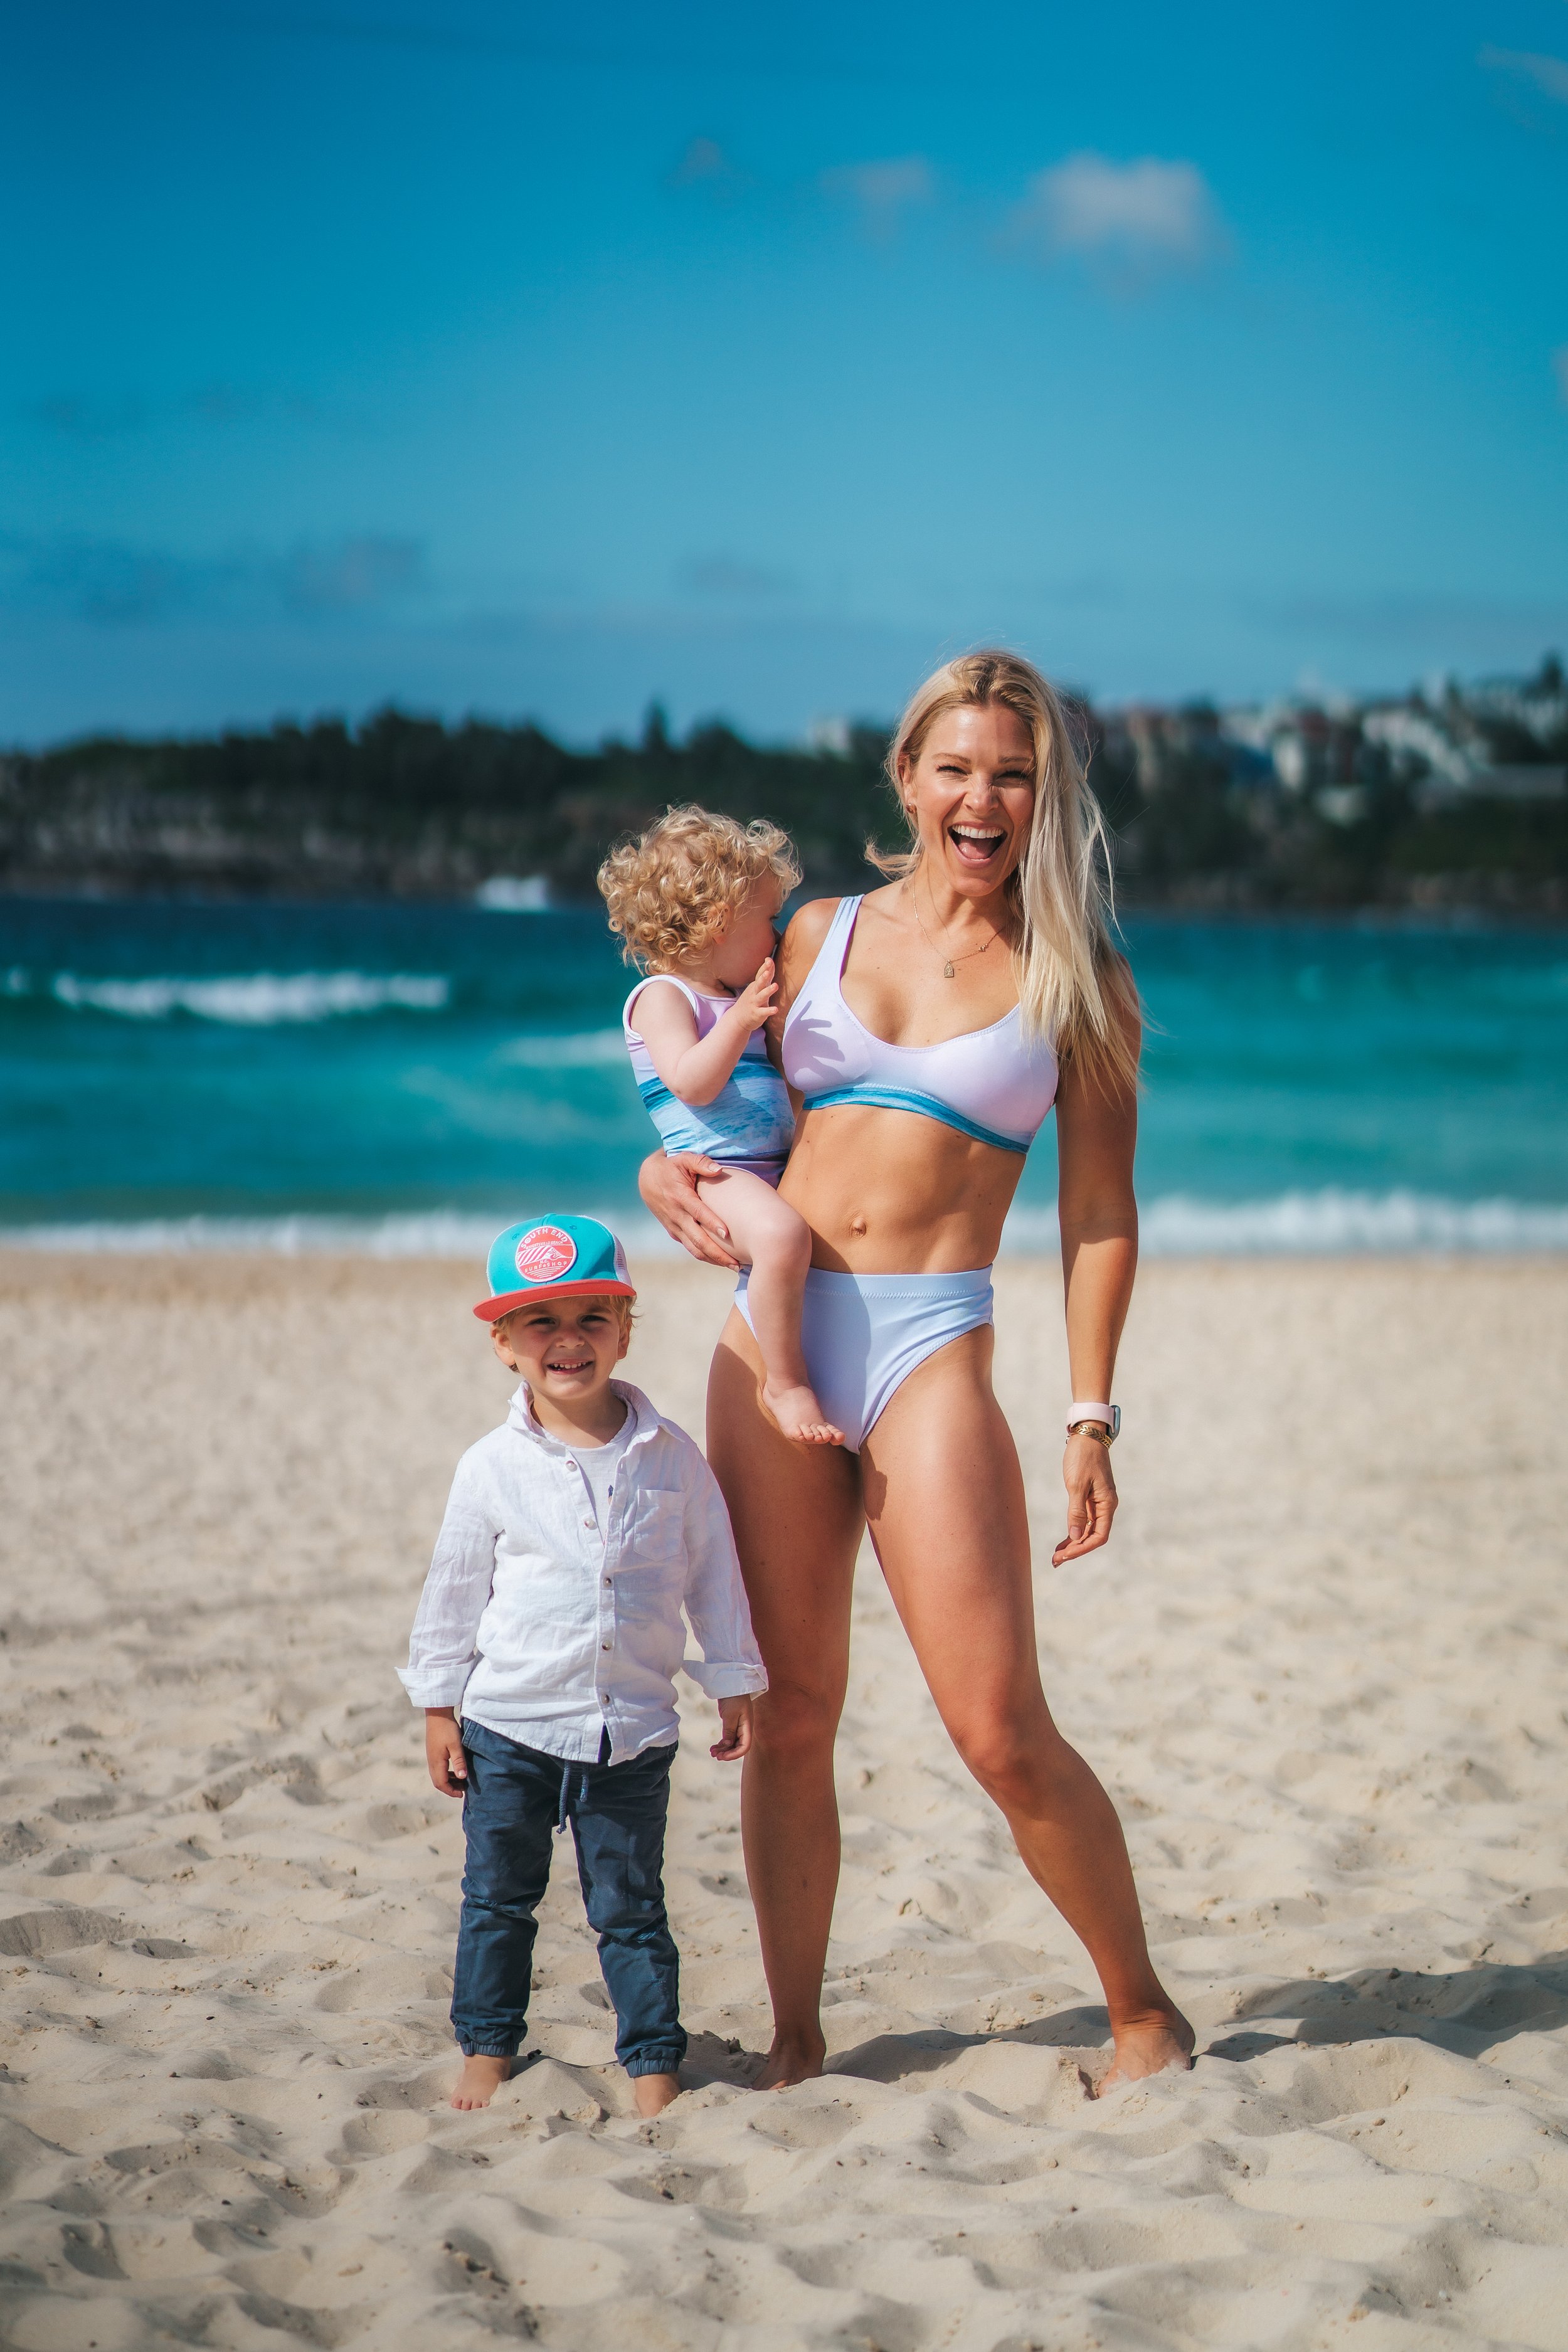 Anna Kooiman Active - App Fitness and Activewear for Moms